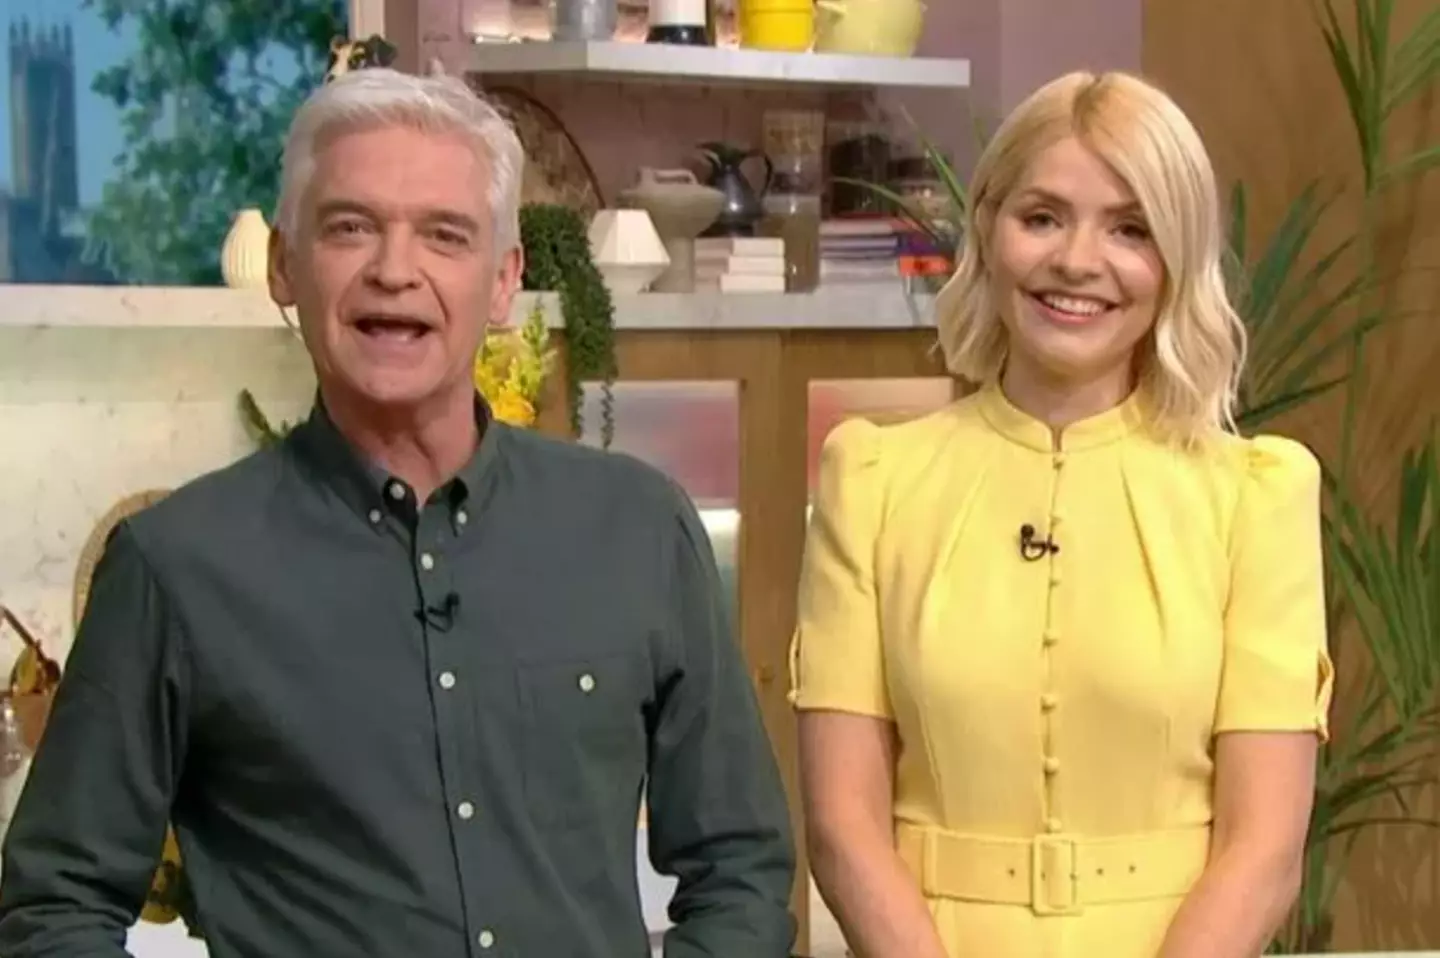 Phillip Schofield has stepped down from hosting This Morning after 2 decades.